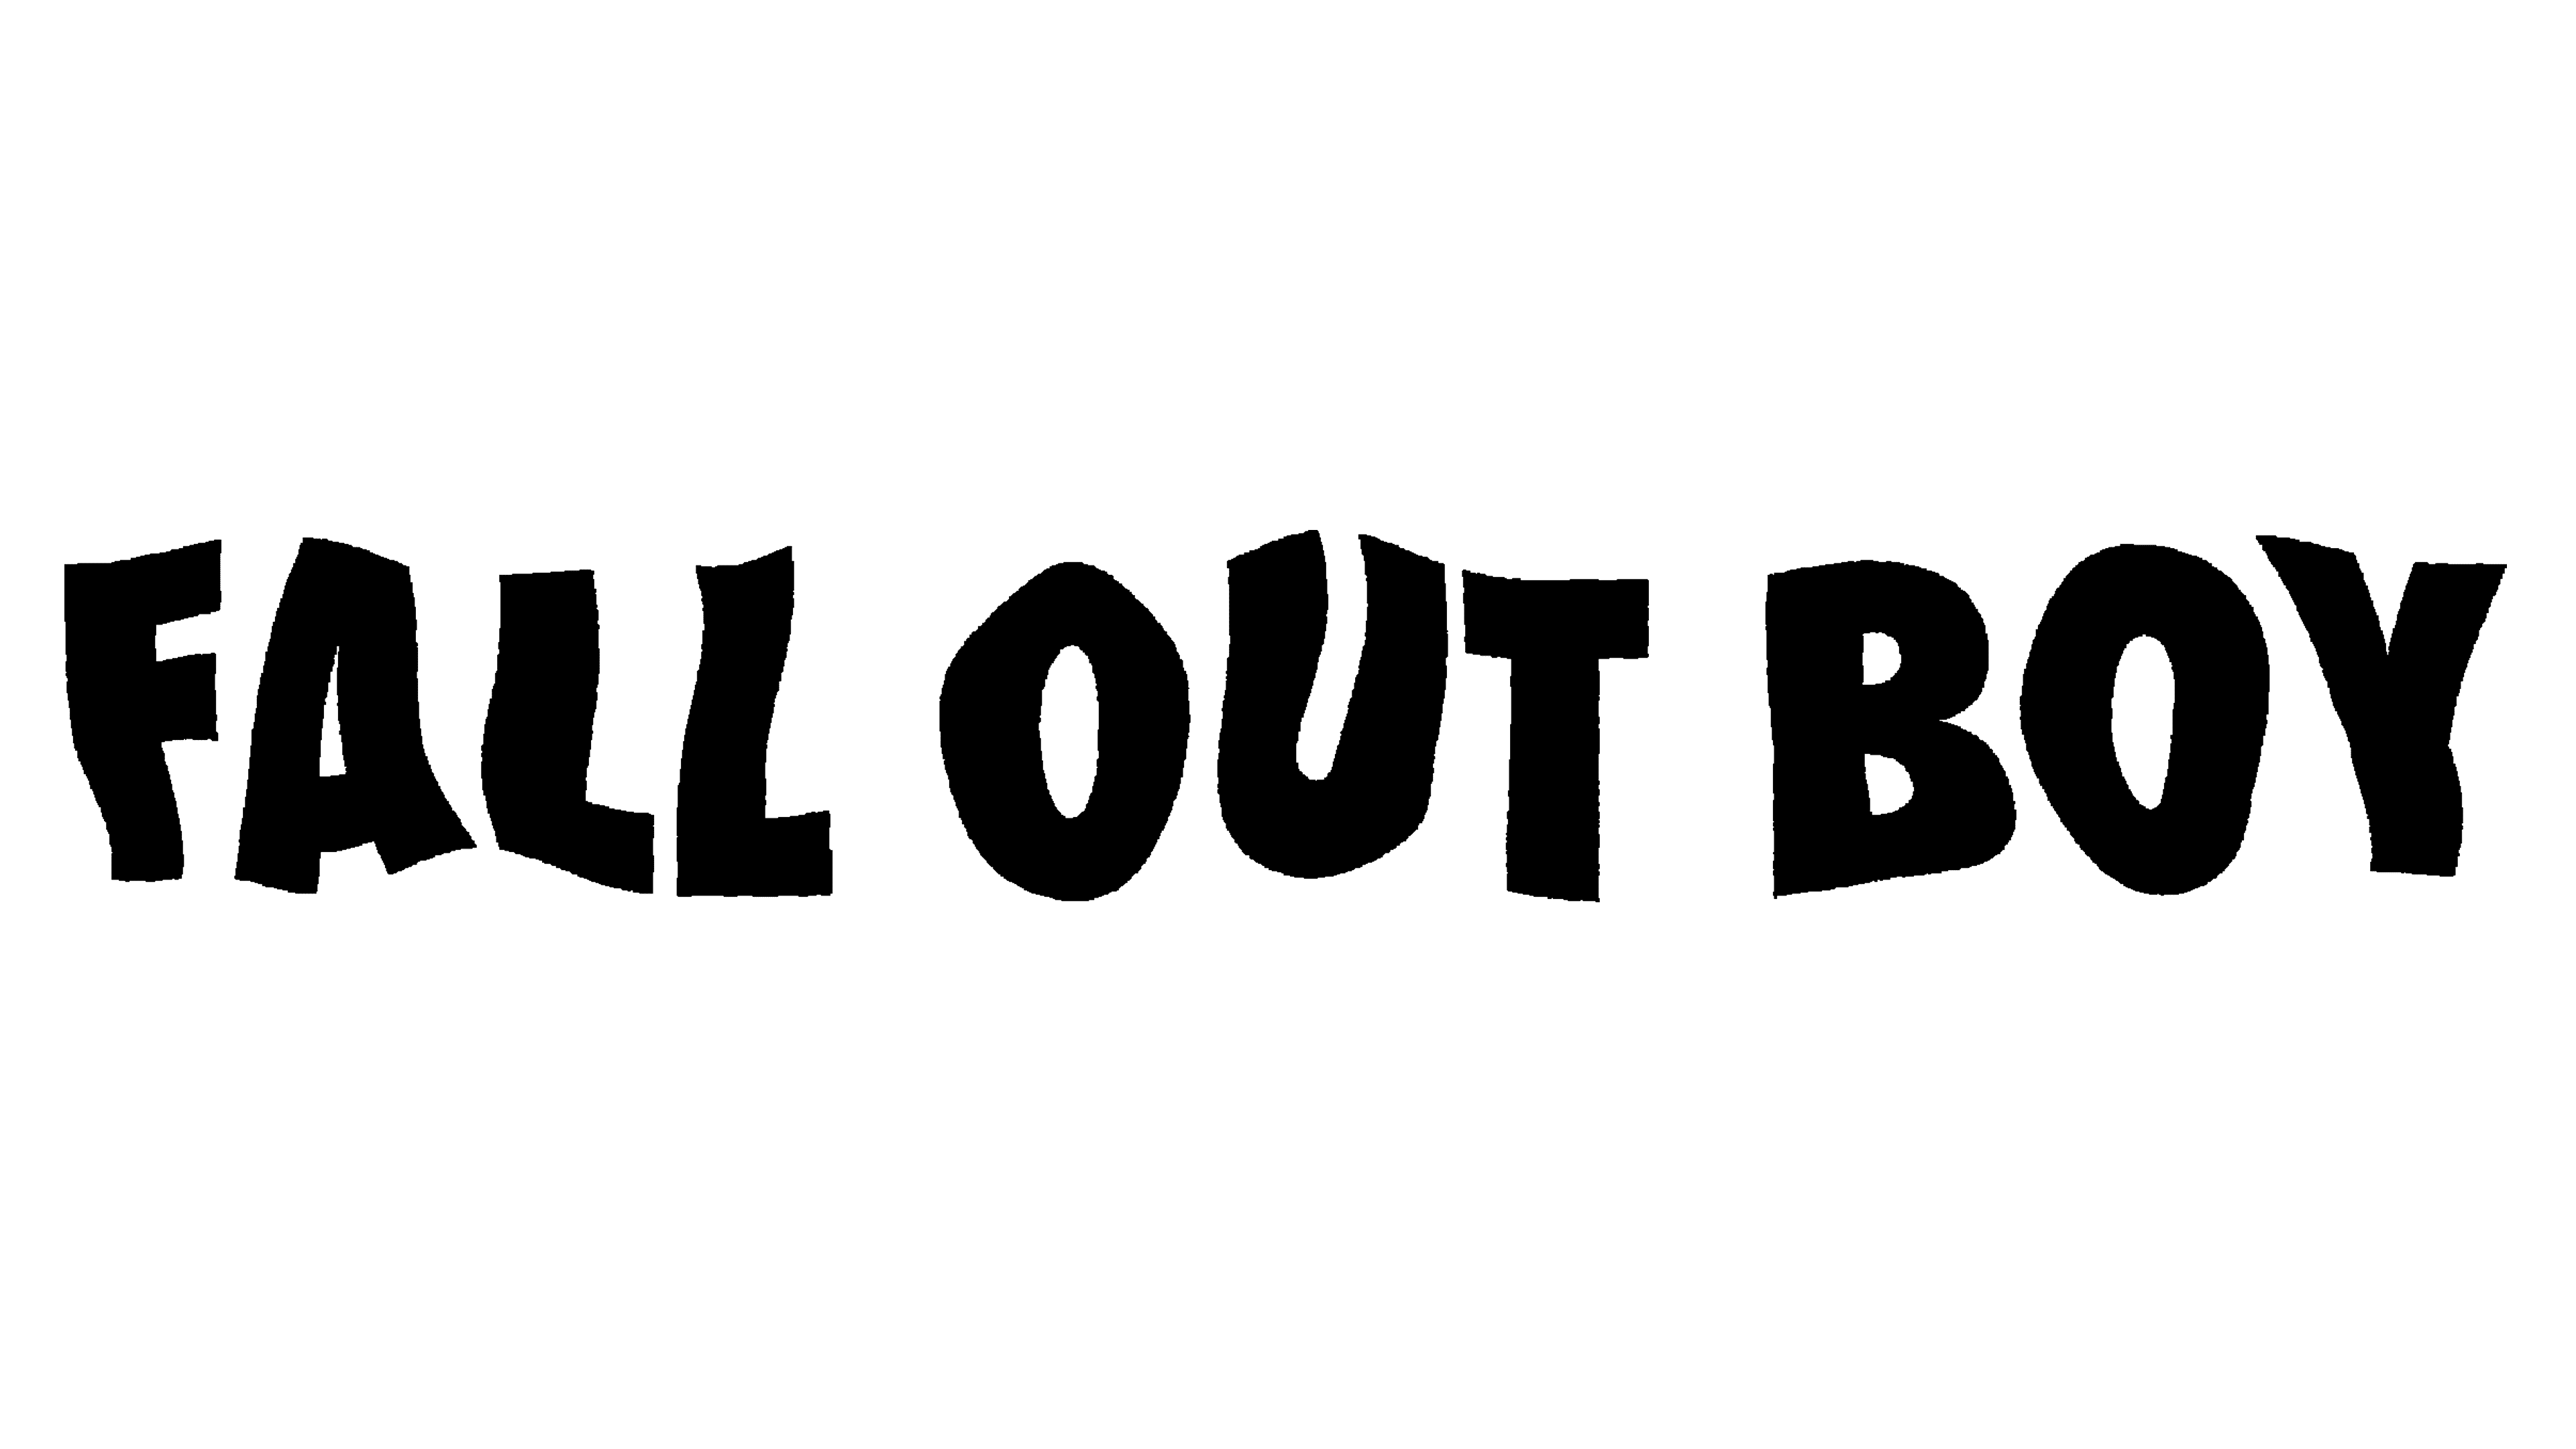 Fall Out Boy Logo And Symbol Meaning History Png Brand